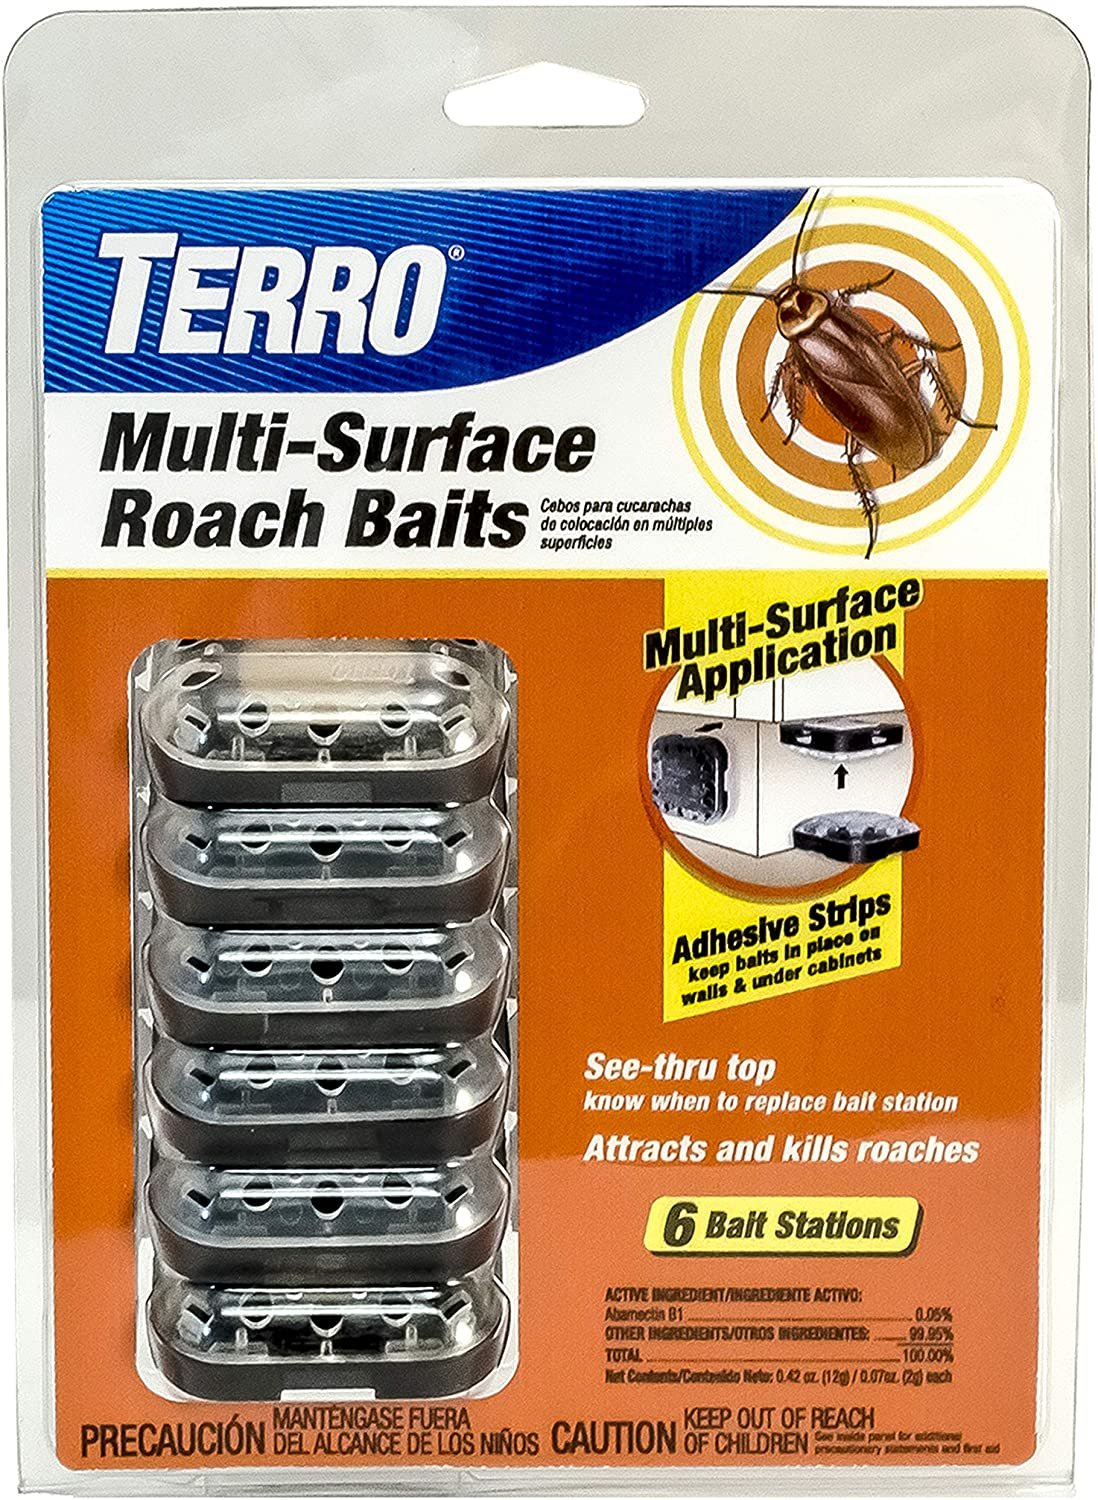 TERRO Multi-Surface Roach Baits, 6 Pack - image 1 of 13